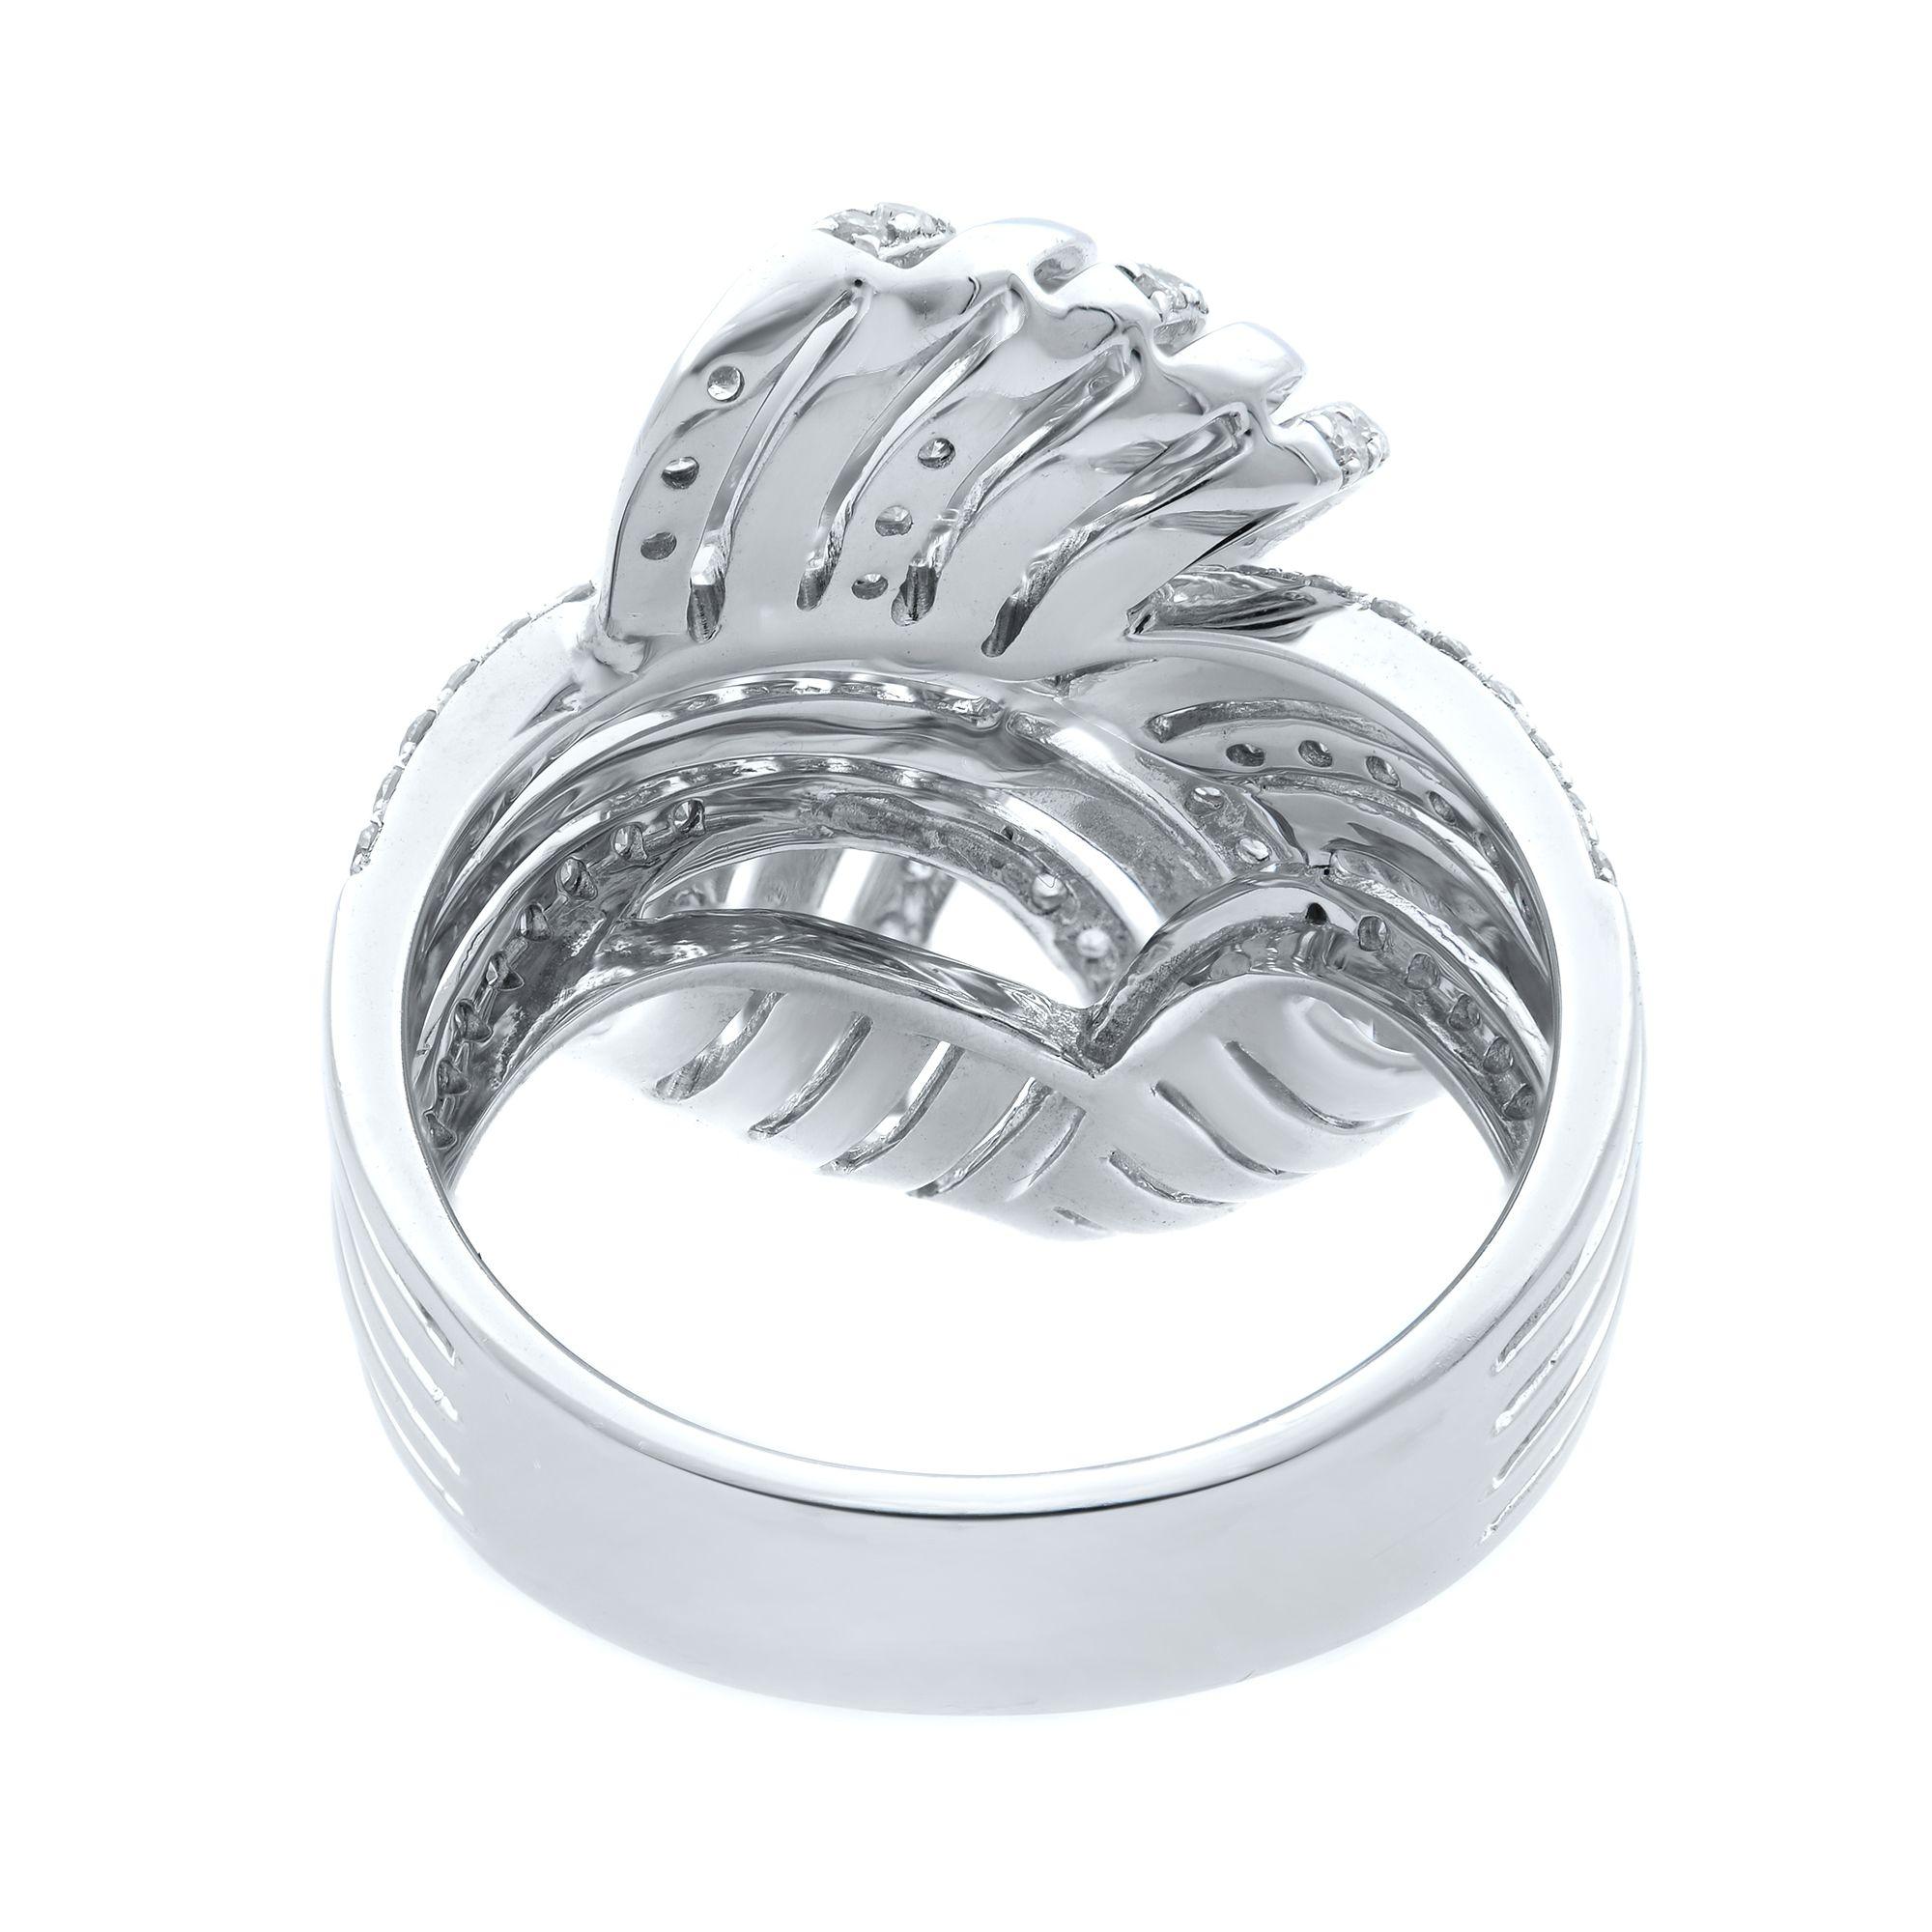 Rachel Koen Diamond Cocktail Ring 14K White Gold 0.87cttw In New Condition For Sale In New York, NY